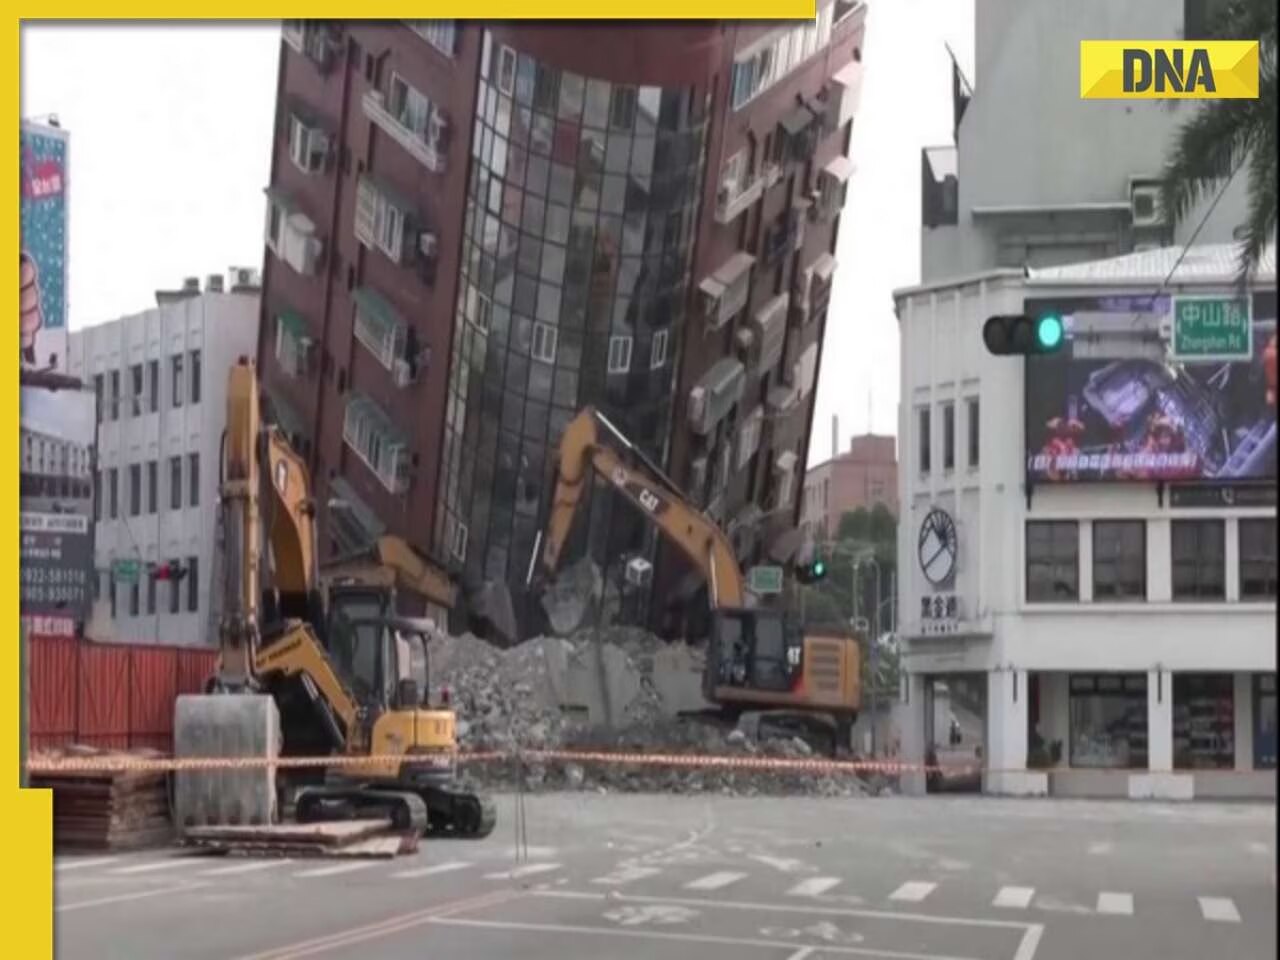 Taiwan hit by dozens of earthquakes, largest measuring 6.3 magnitude, no major damage reported